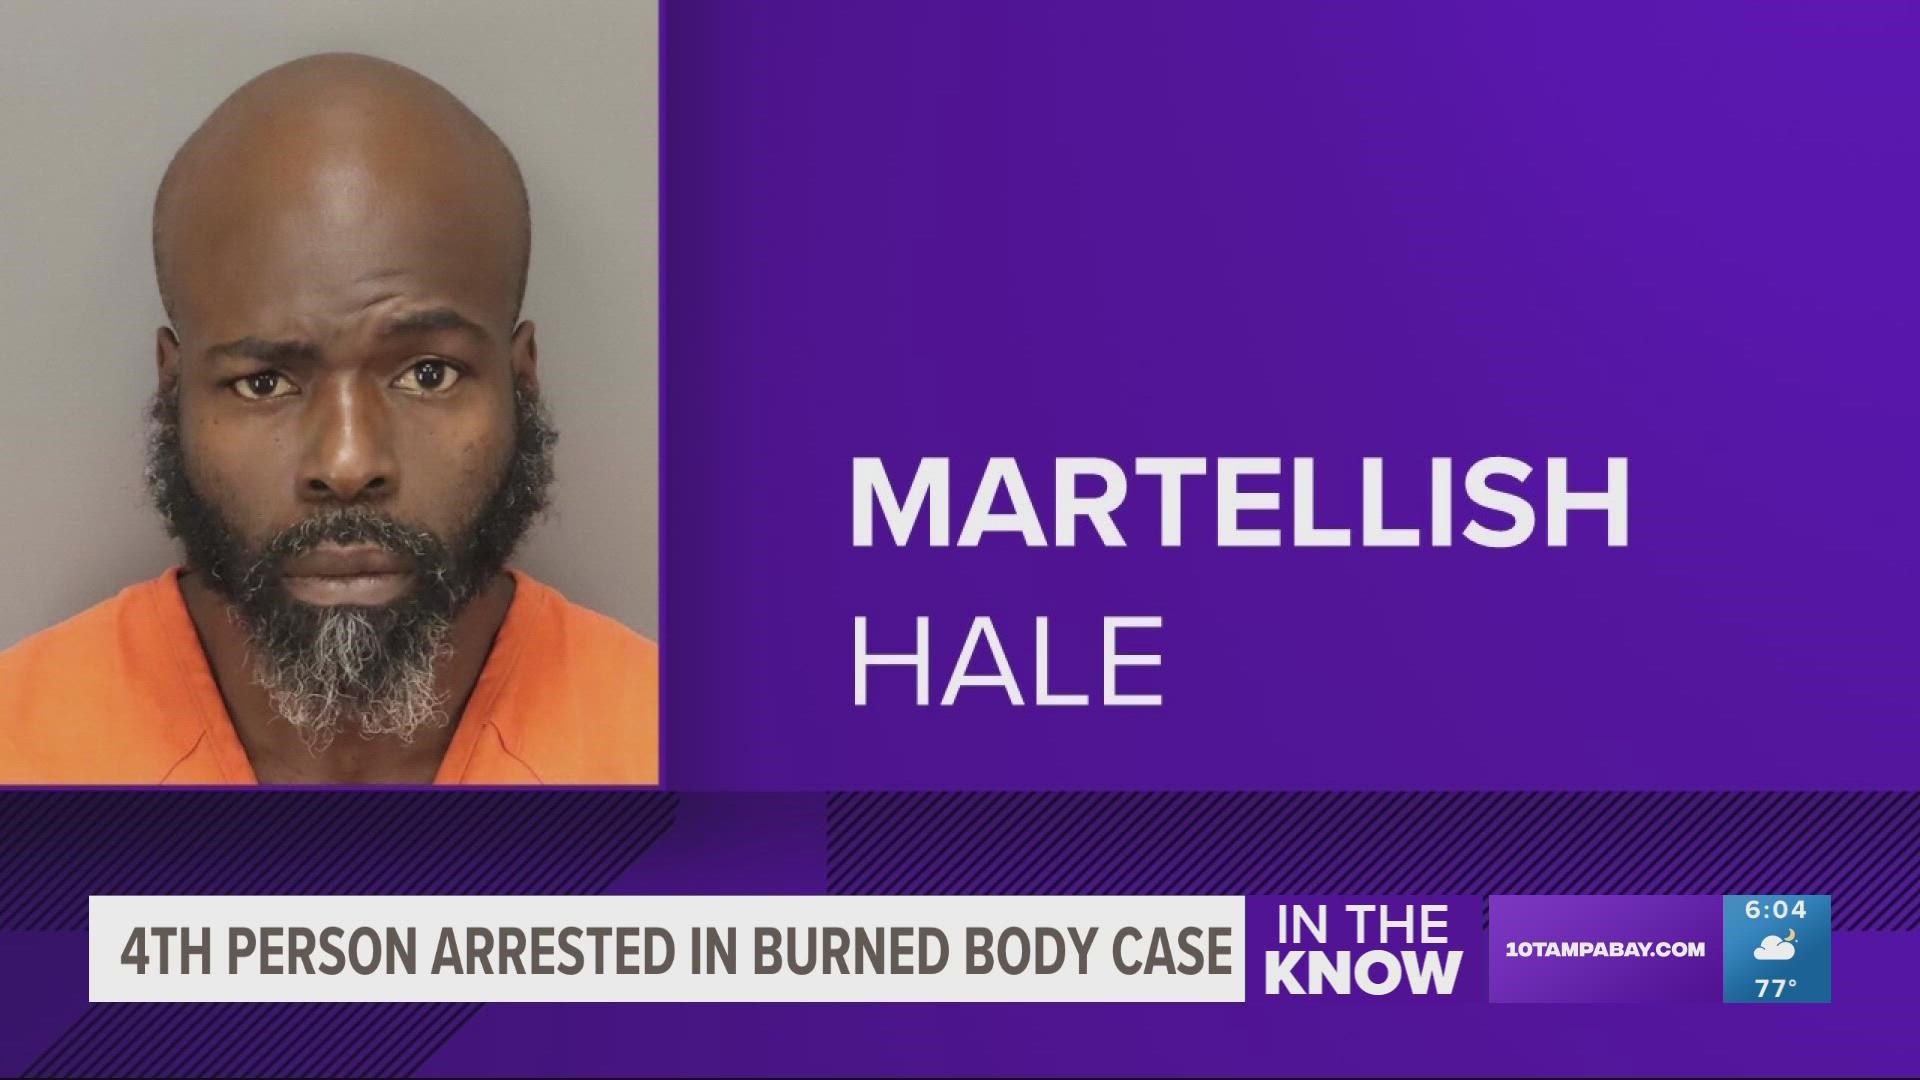 Investigators linked a cell phone found near the burning body to 43-year-old Martellish Hale, according to an affidavit.